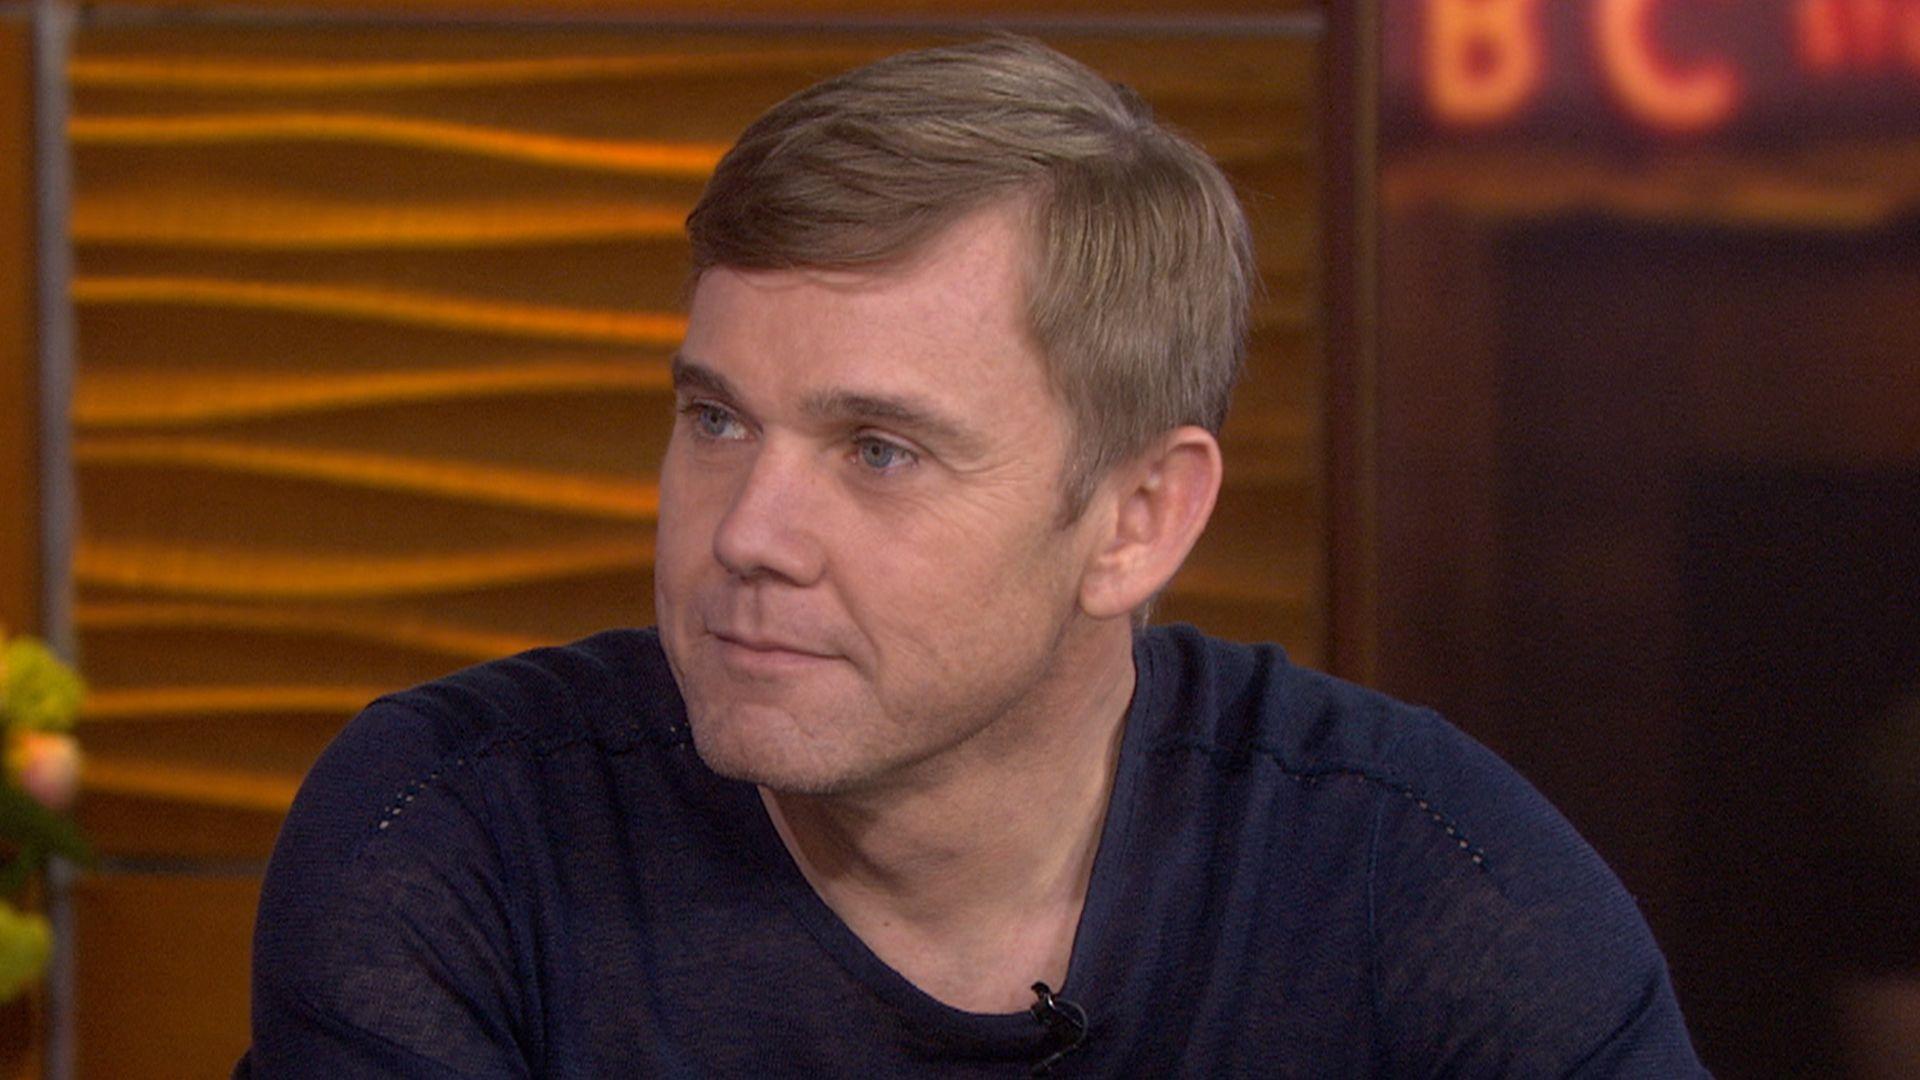 Ricky Schroder's 'Fighting Season' follows US troops in combat